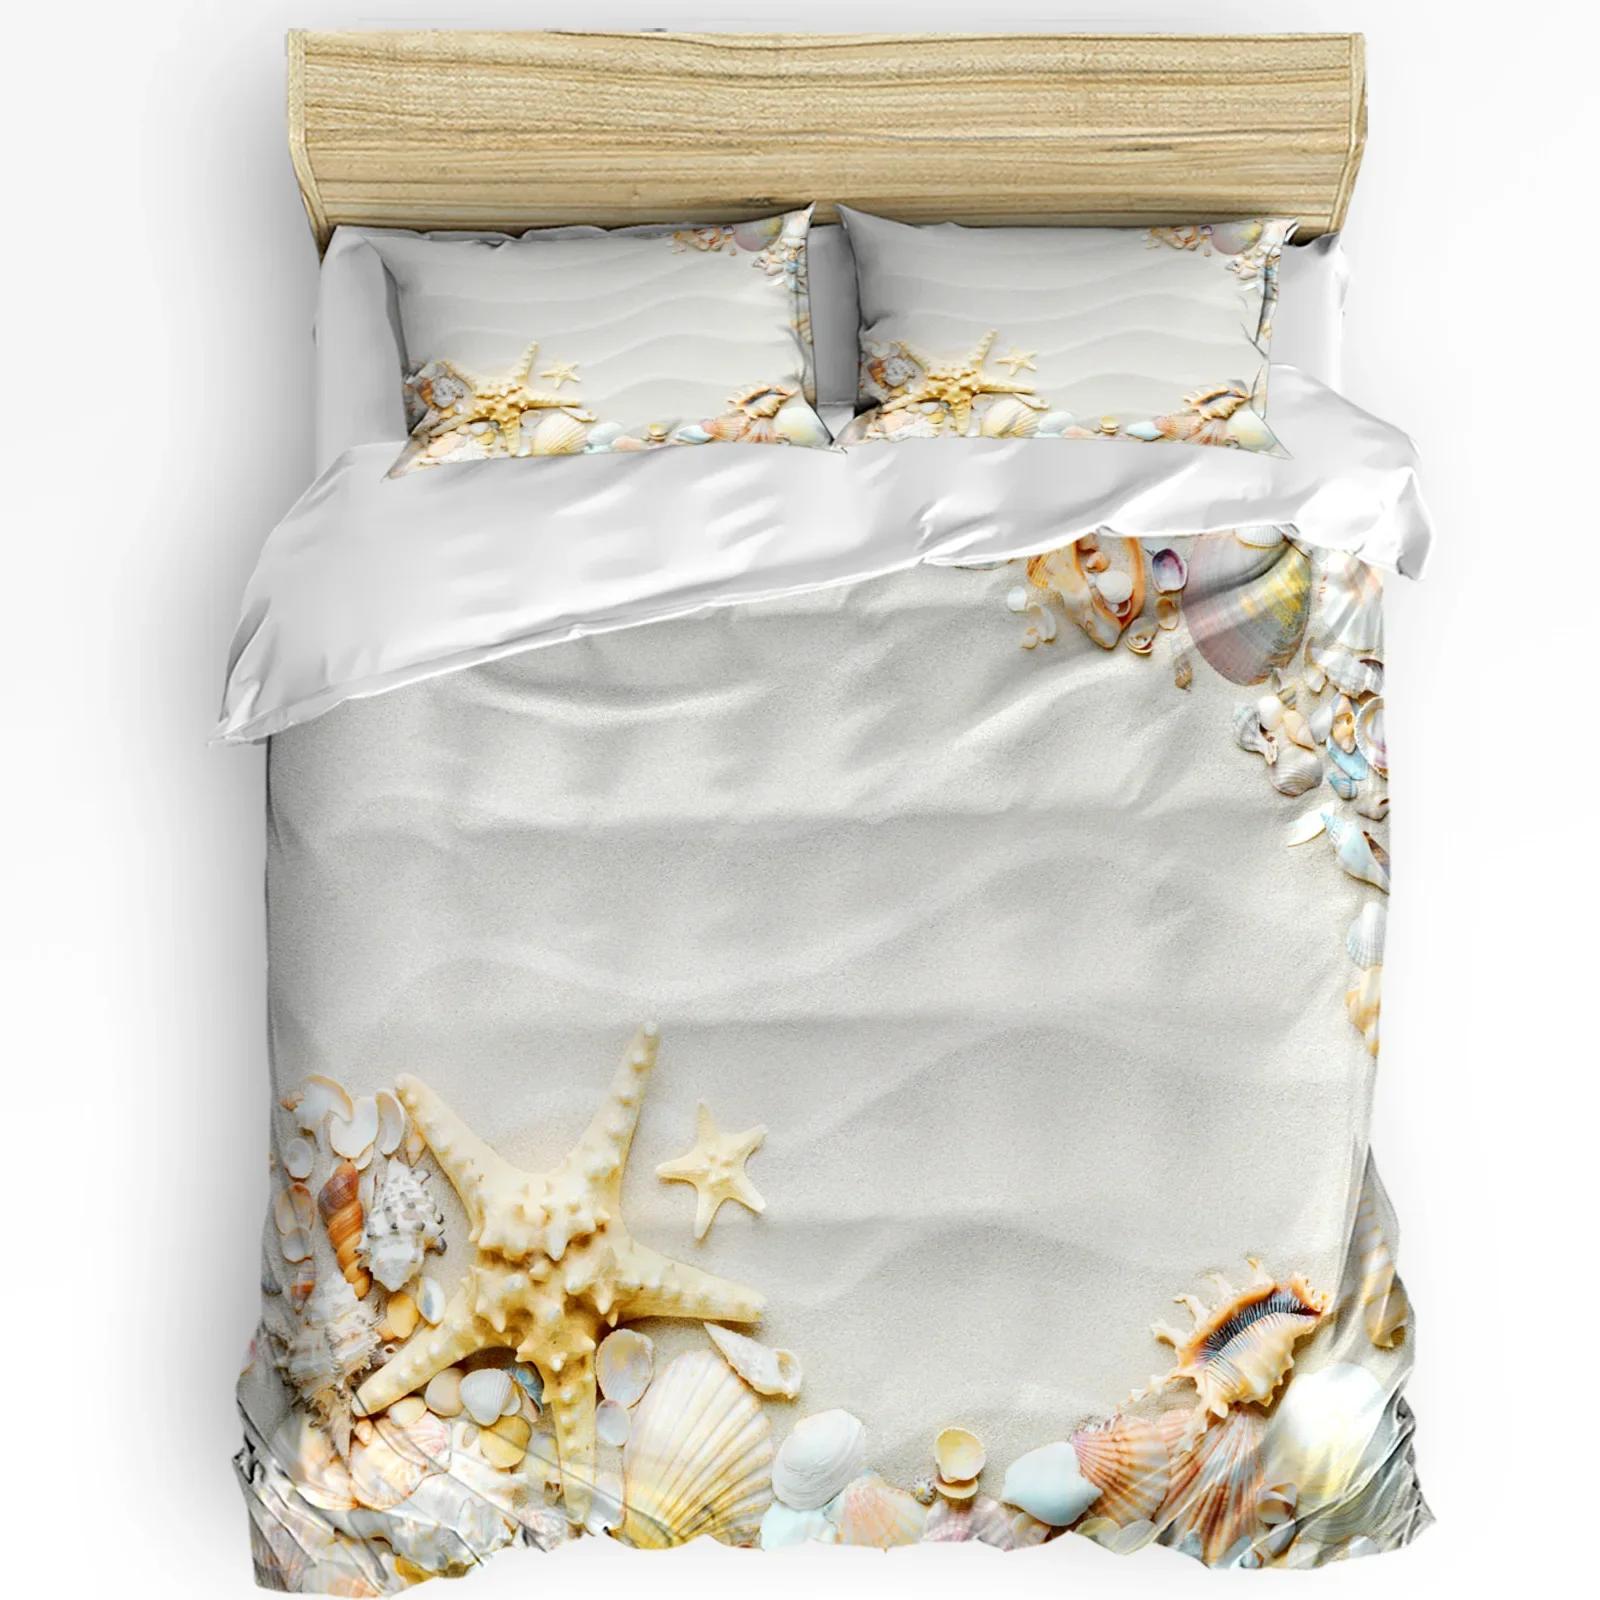 Beach Sand Waves Starfish Shell Conch Bedding Set 3pcs Duvet Cover Pillowcase Kids Adult Quilt Cover Double Bed Set